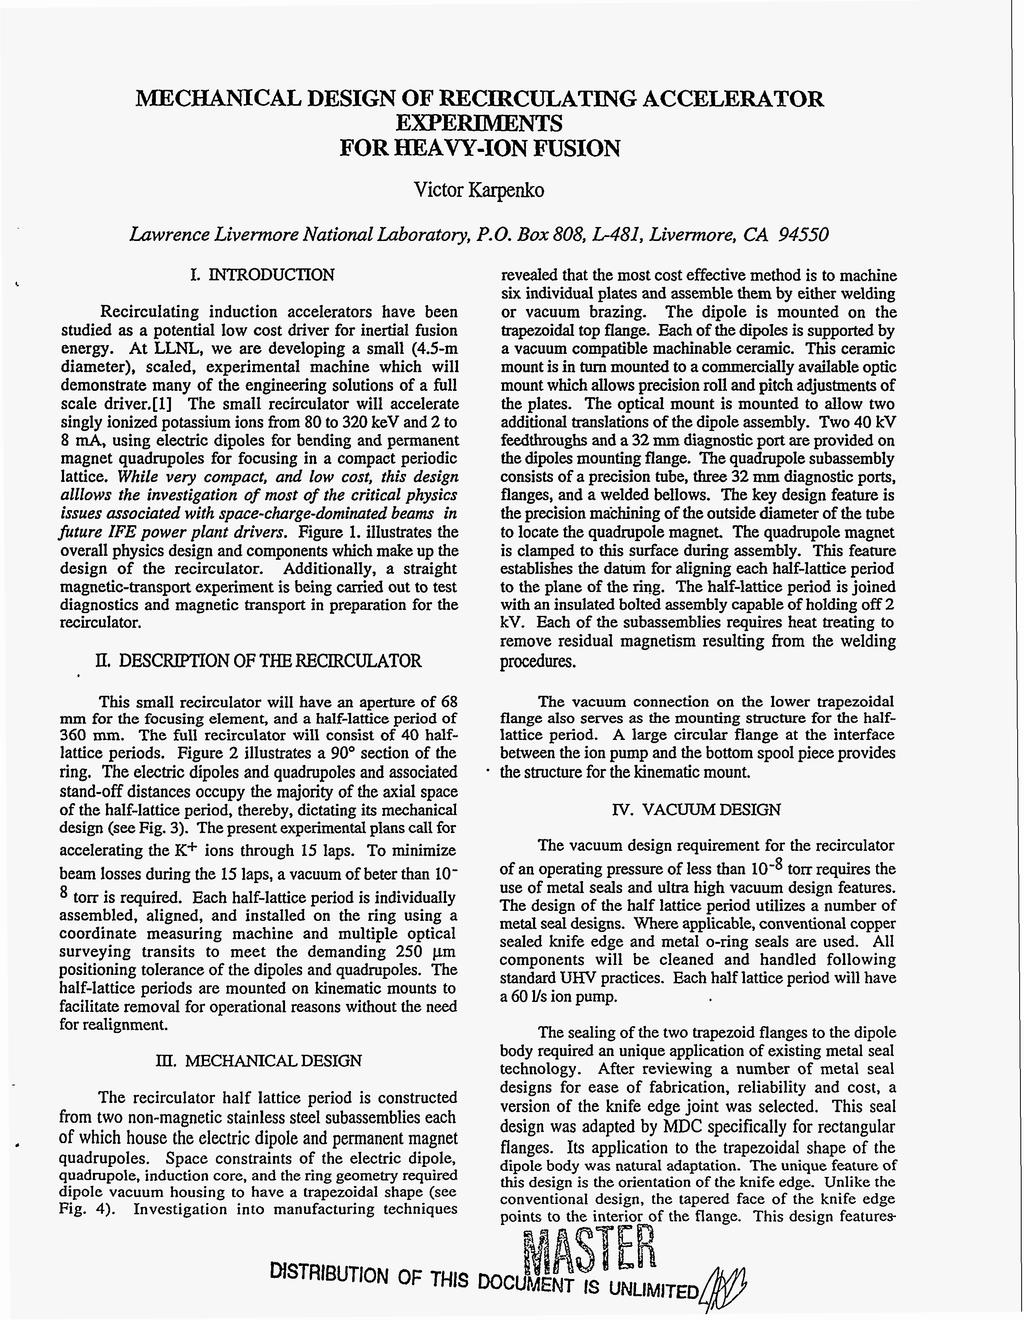 MECHANICAL DESIGN OF RECIRCULATING ACCELERATOR EXPERIMENTS FOR ]HEAVY-ION FUSION Victor Karpenko Lawrence Livermore National Luboratov, P.O. Box 808, L481,Livermore, CA 94550 4. I.